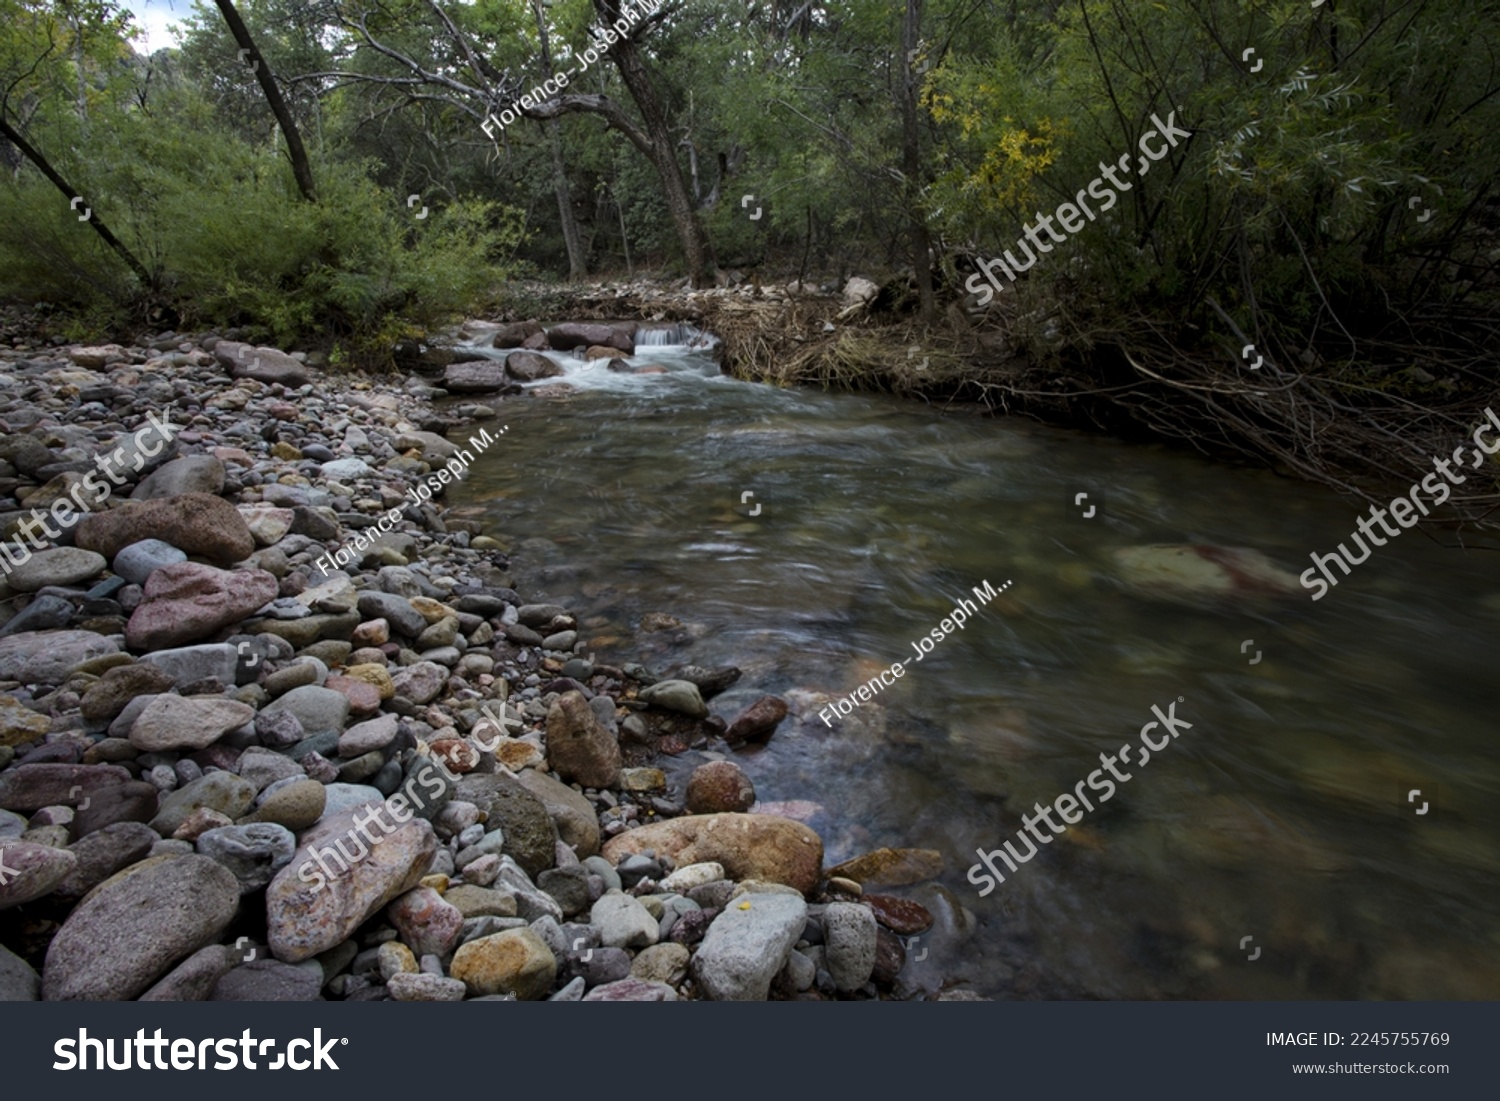 Creek water flows along rocky bank of Idlewilde Campground in Cave Creek Canyon, Coronado National Forest, Arizona, United States #2245755769